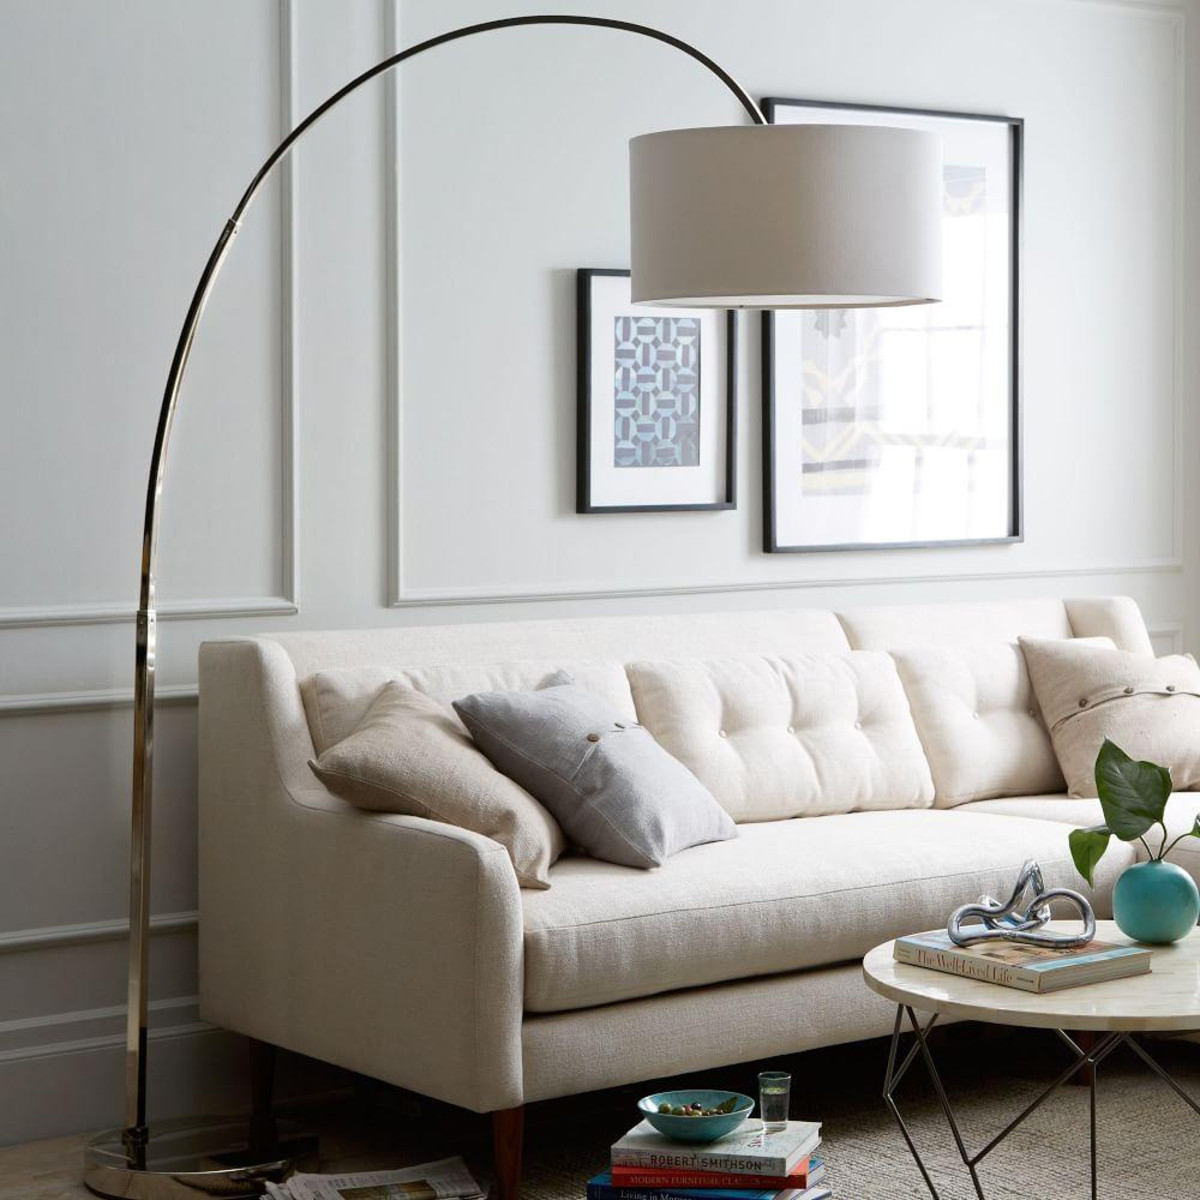 Overarching Floor Lamp Room Disacode Home Design From with proportions 1200 X 1200